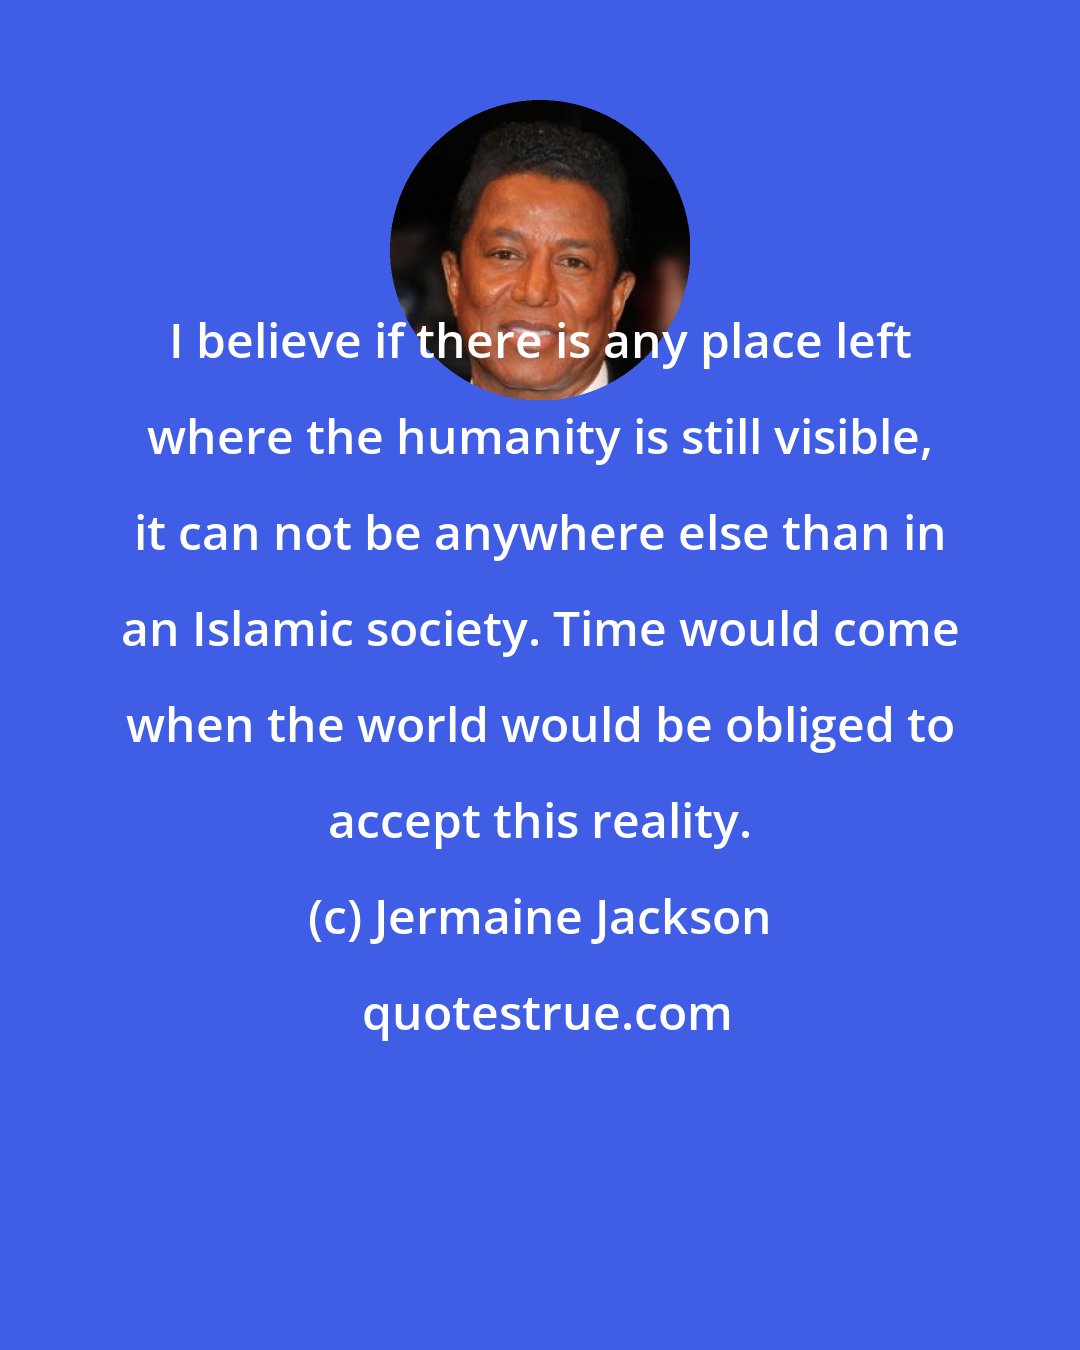 Jermaine Jackson: I believe if there is any place left where the humanity is still visible, it can not be anywhere else than in an Islamic society. Time would come when the world would be obliged to accept this reality.